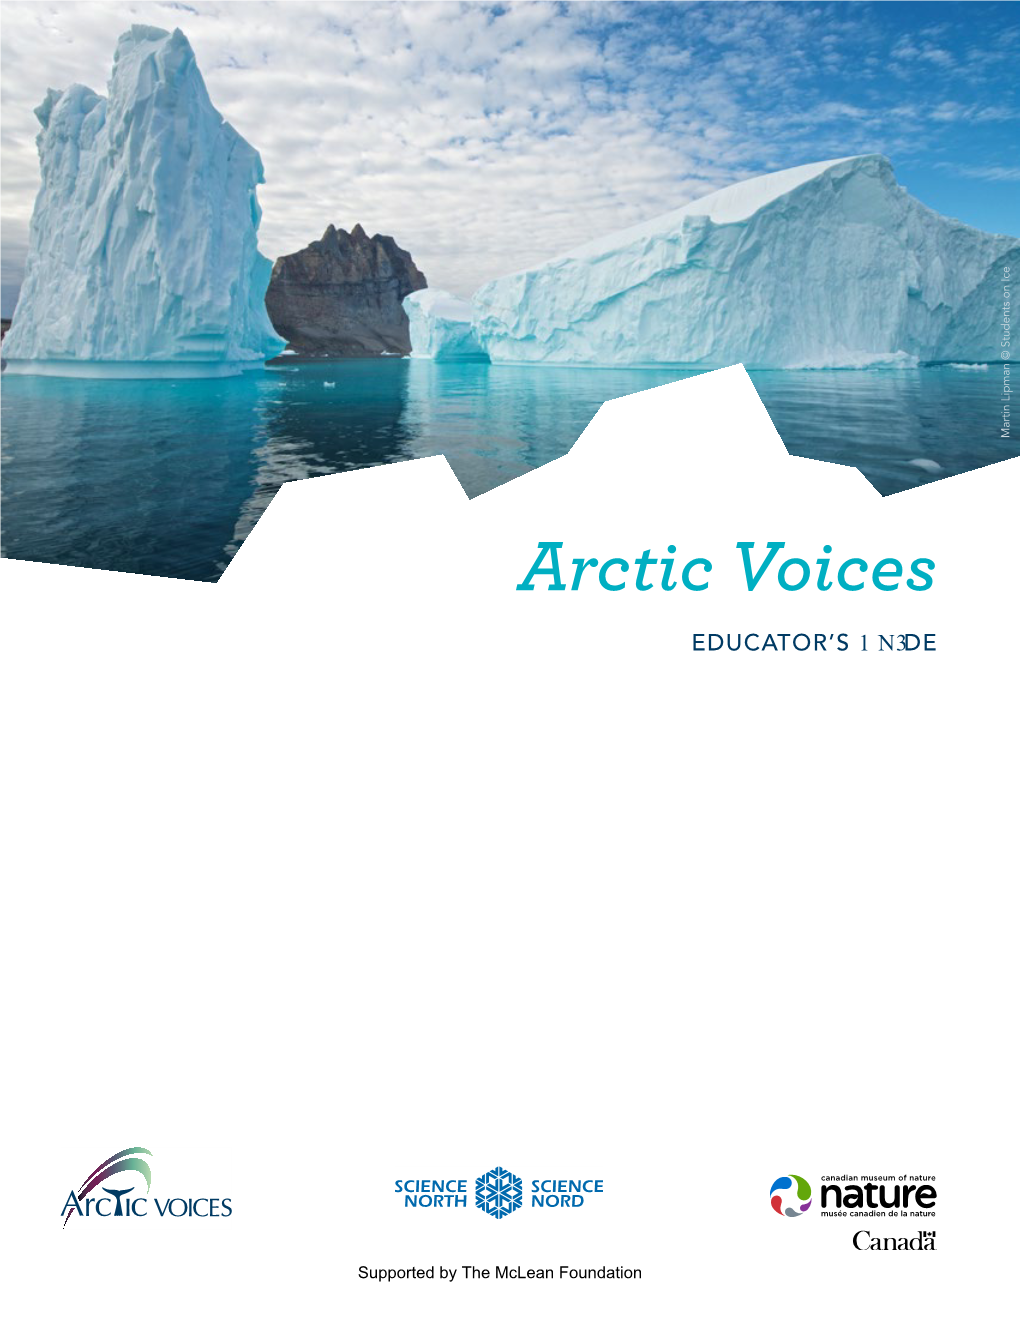 Arctic Voices Gallery Educator Guide